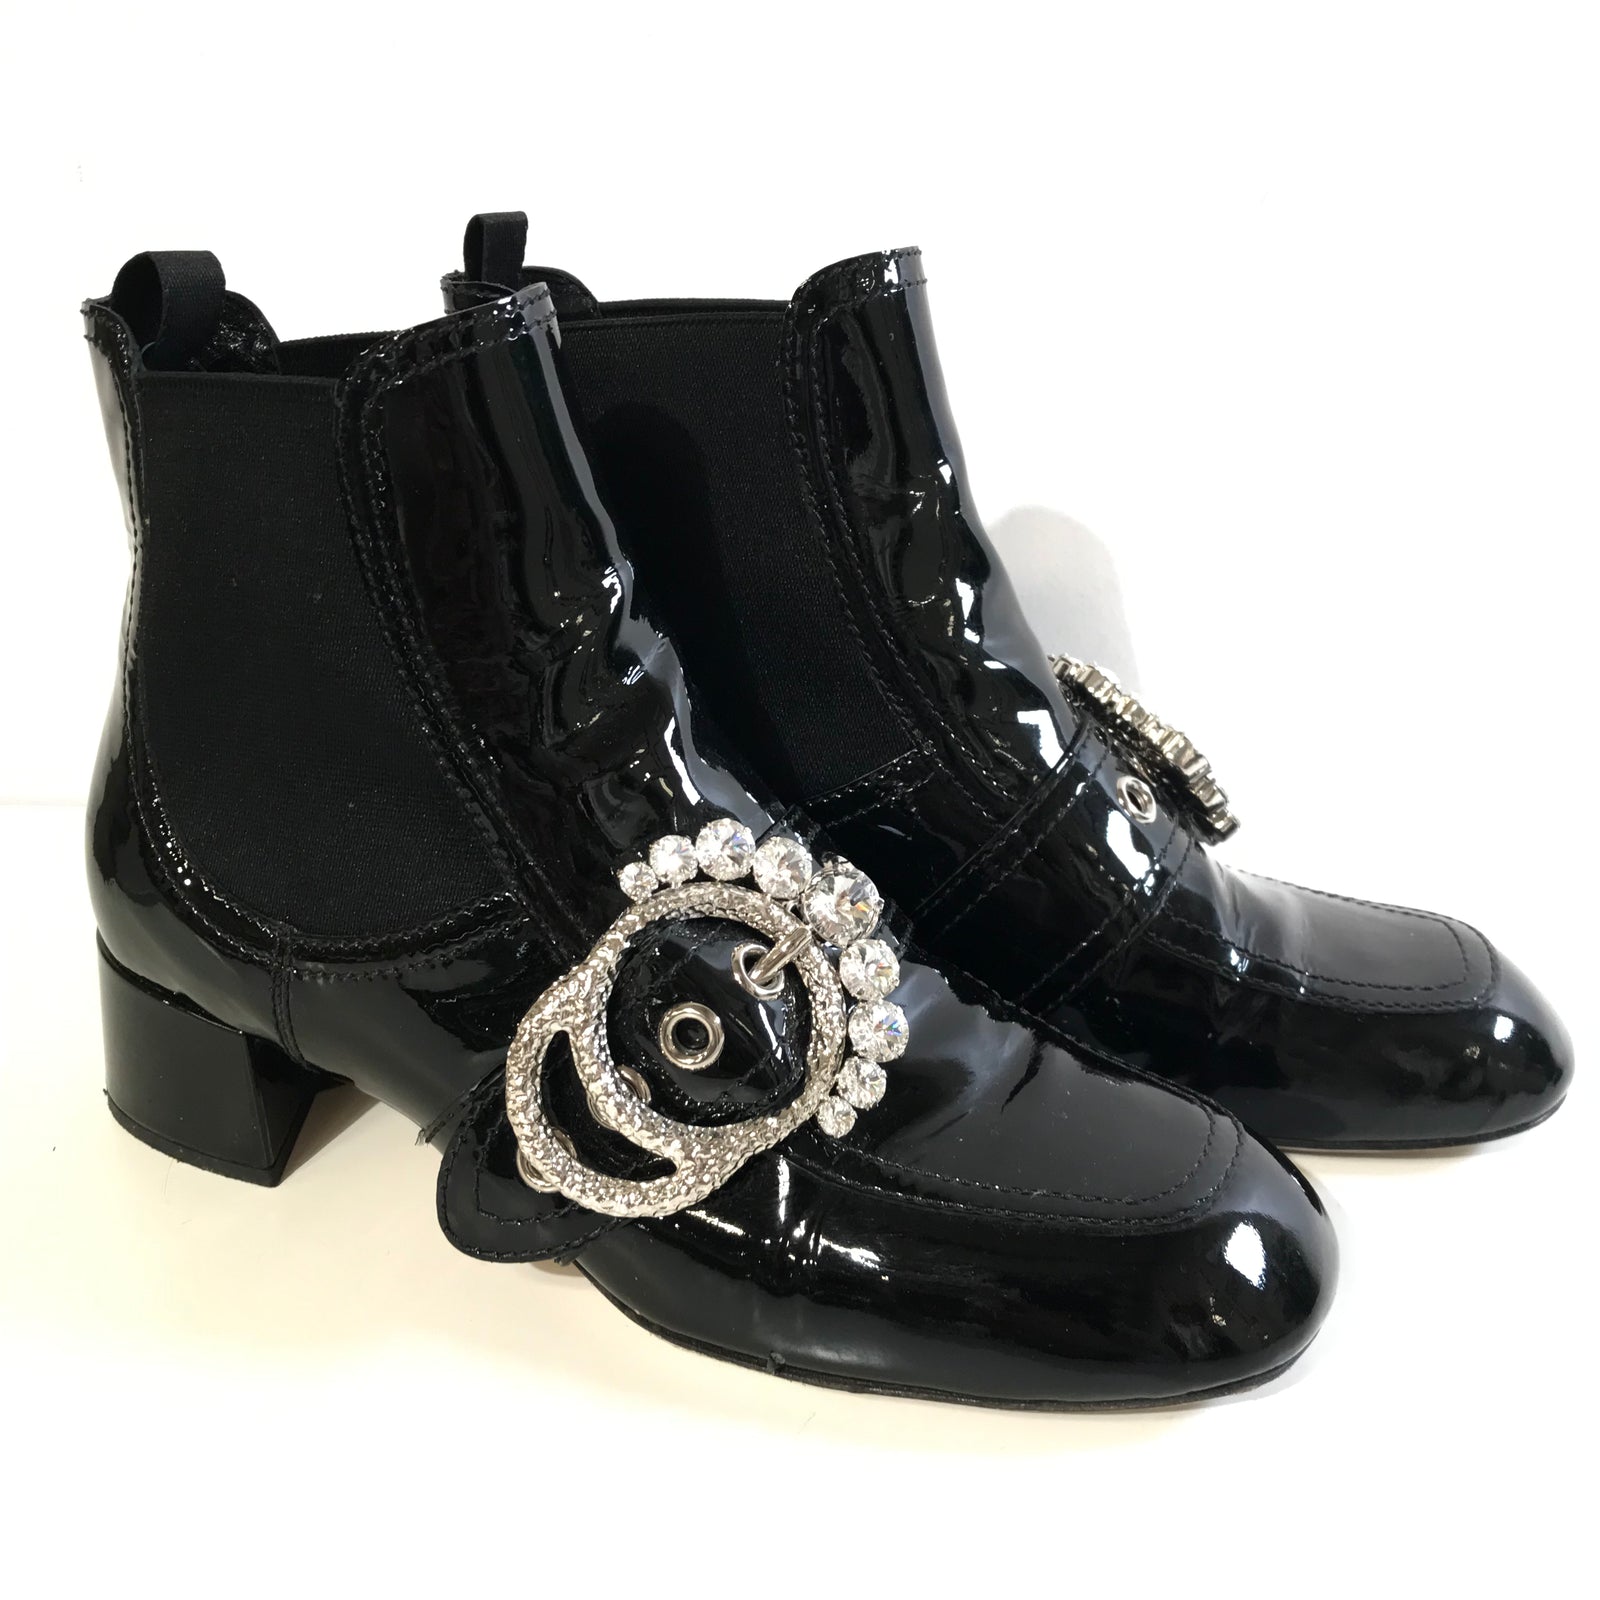 Patent Embellished Boots